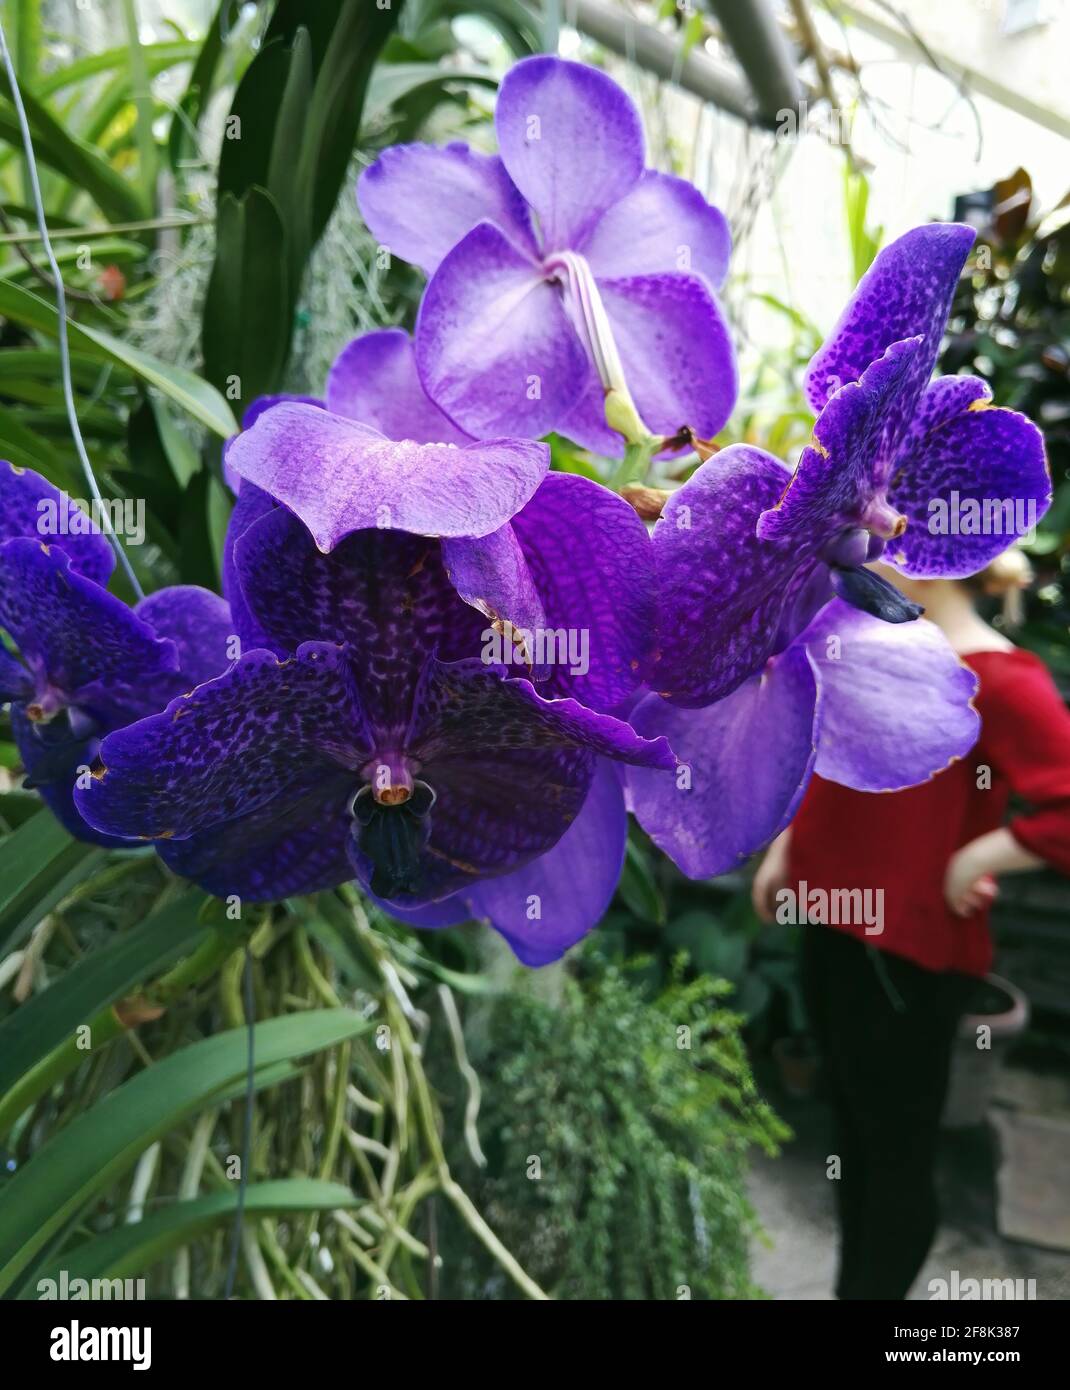 Close up shot of bunch of flowers known as Vanda coerulea, commonly known as blue orchid, blue vanda or autumn lady's tresses, is a species of orchid Stock Photo